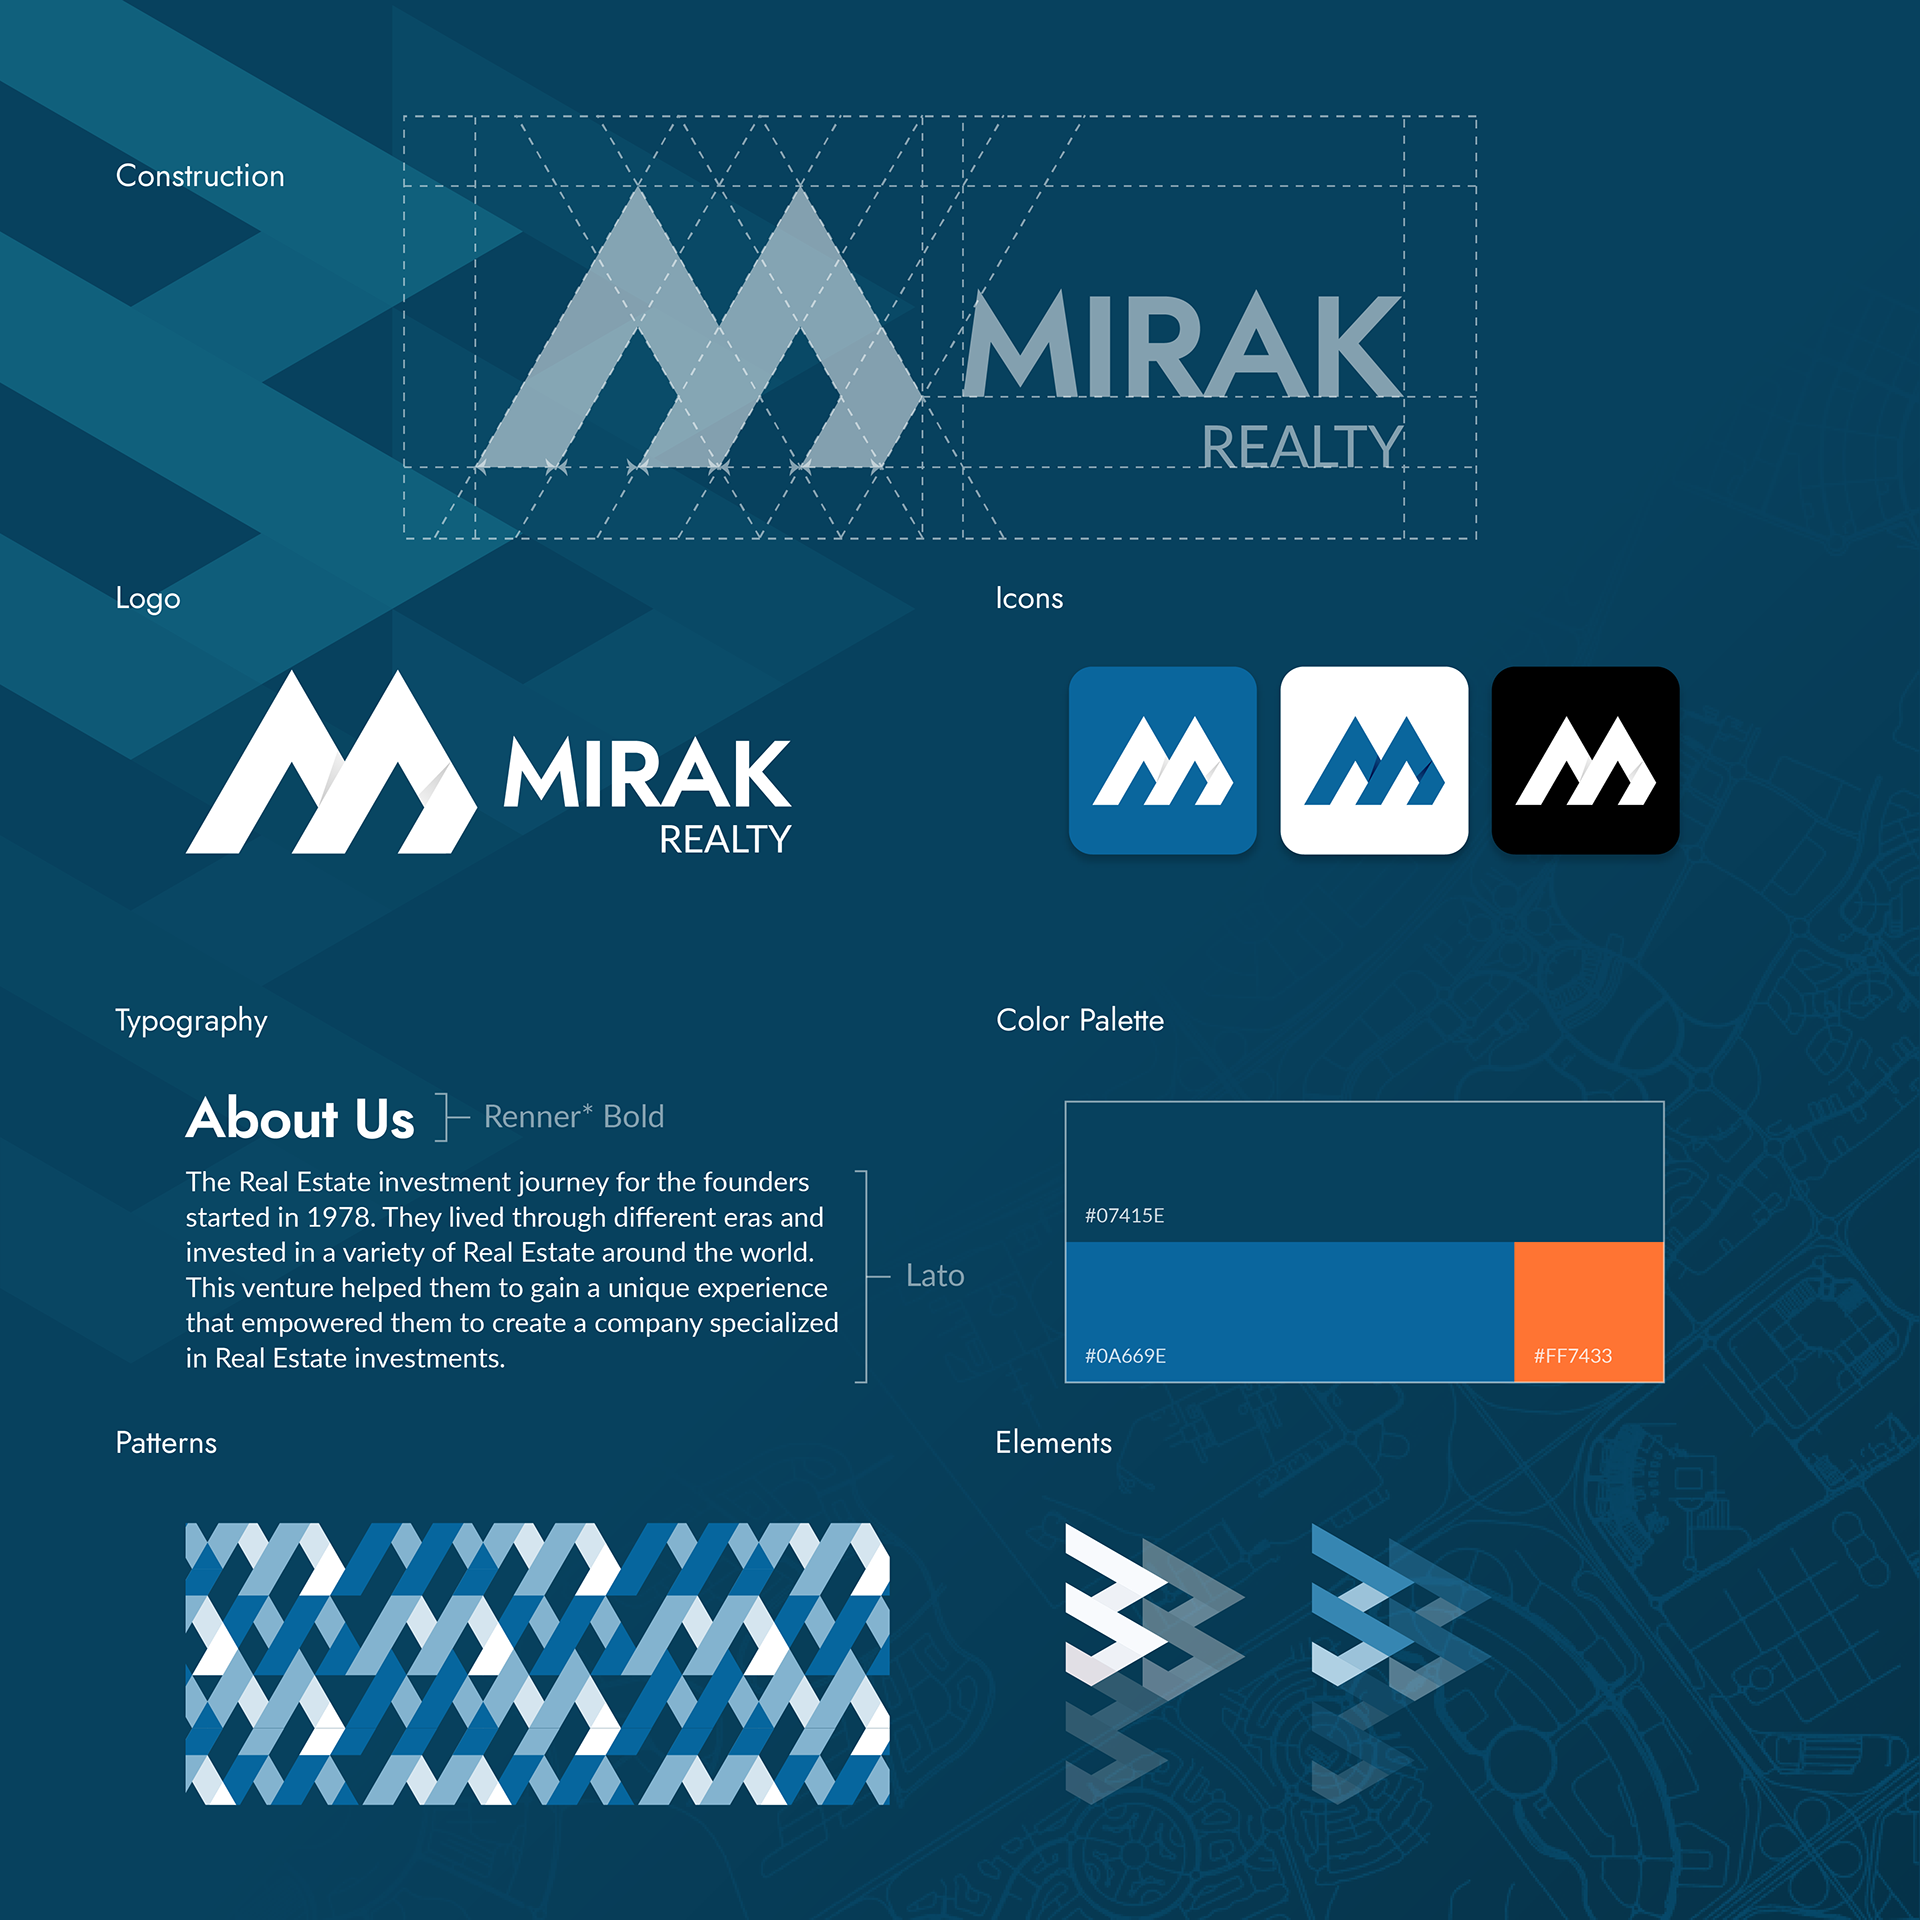 Brand identity overview